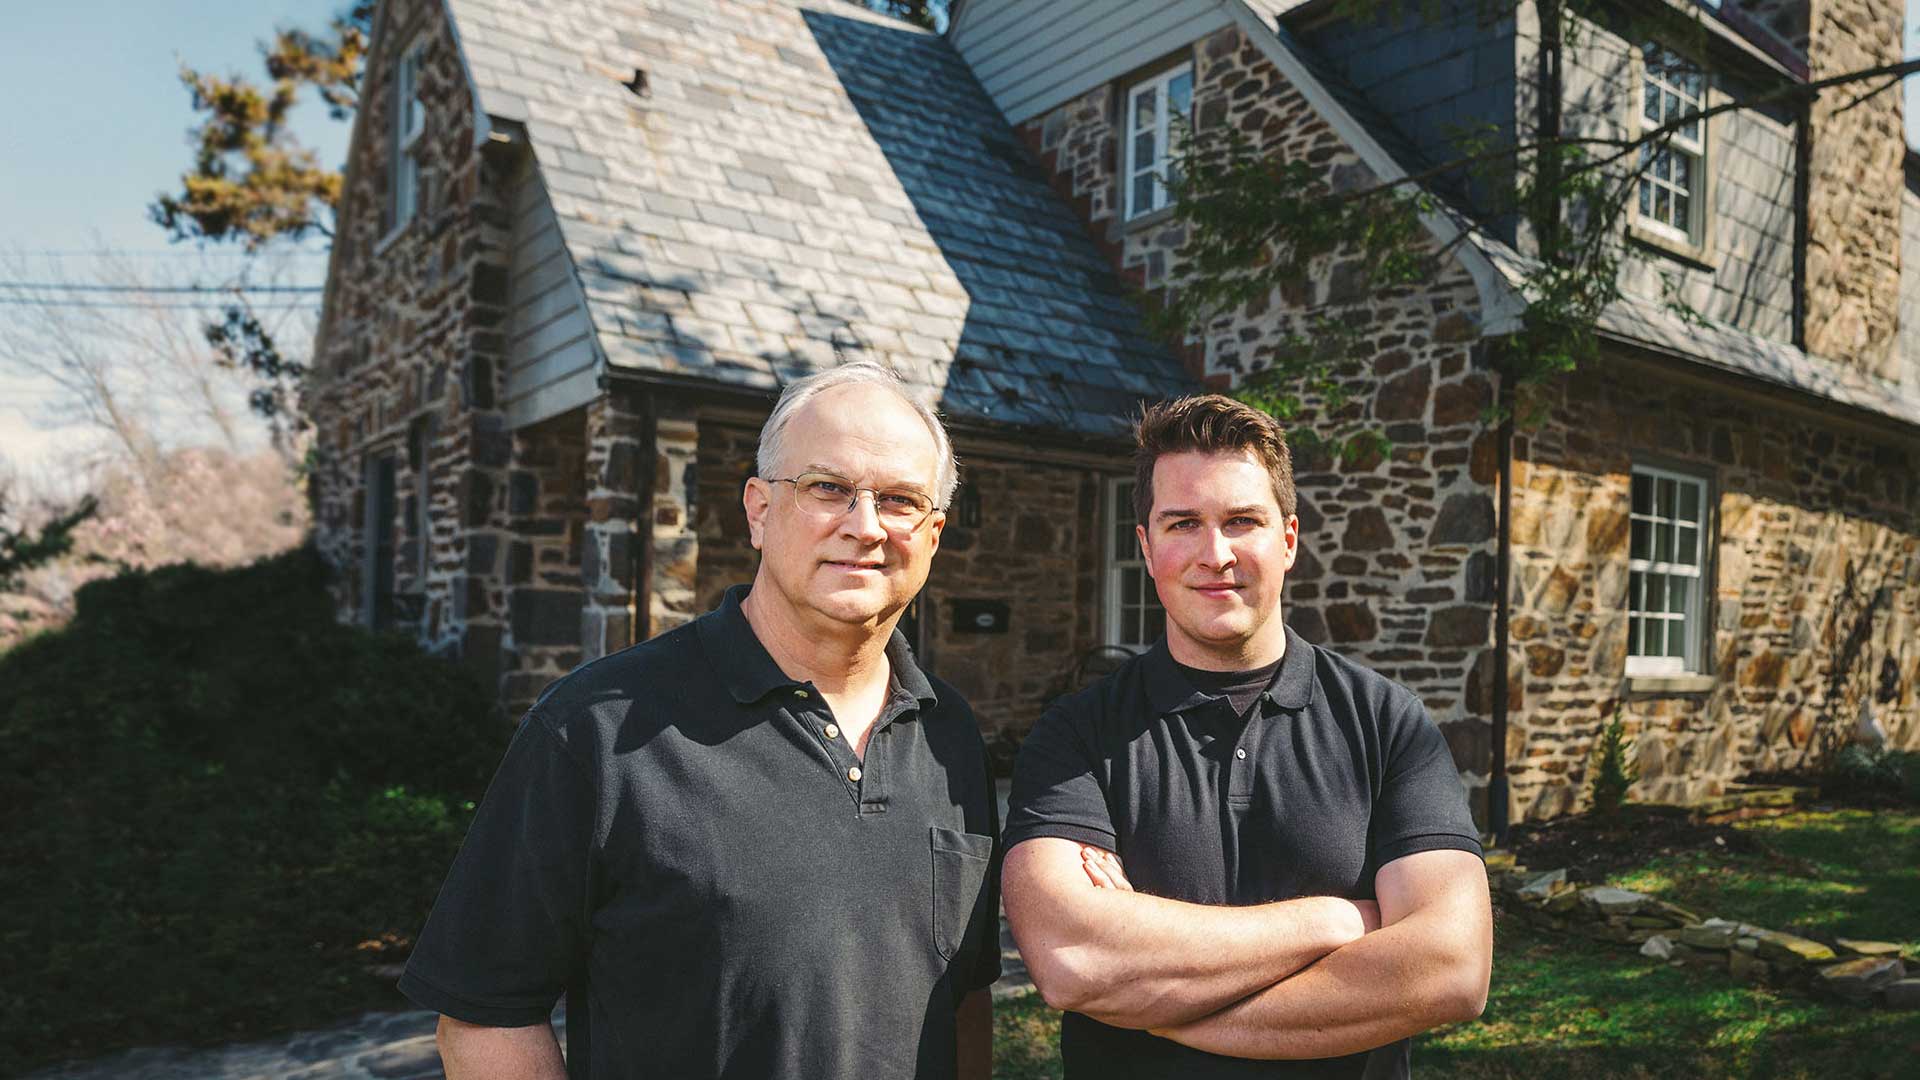 Frank & Sam Taciak of C.A. Taciak & Sons standing in front of an english style stone house